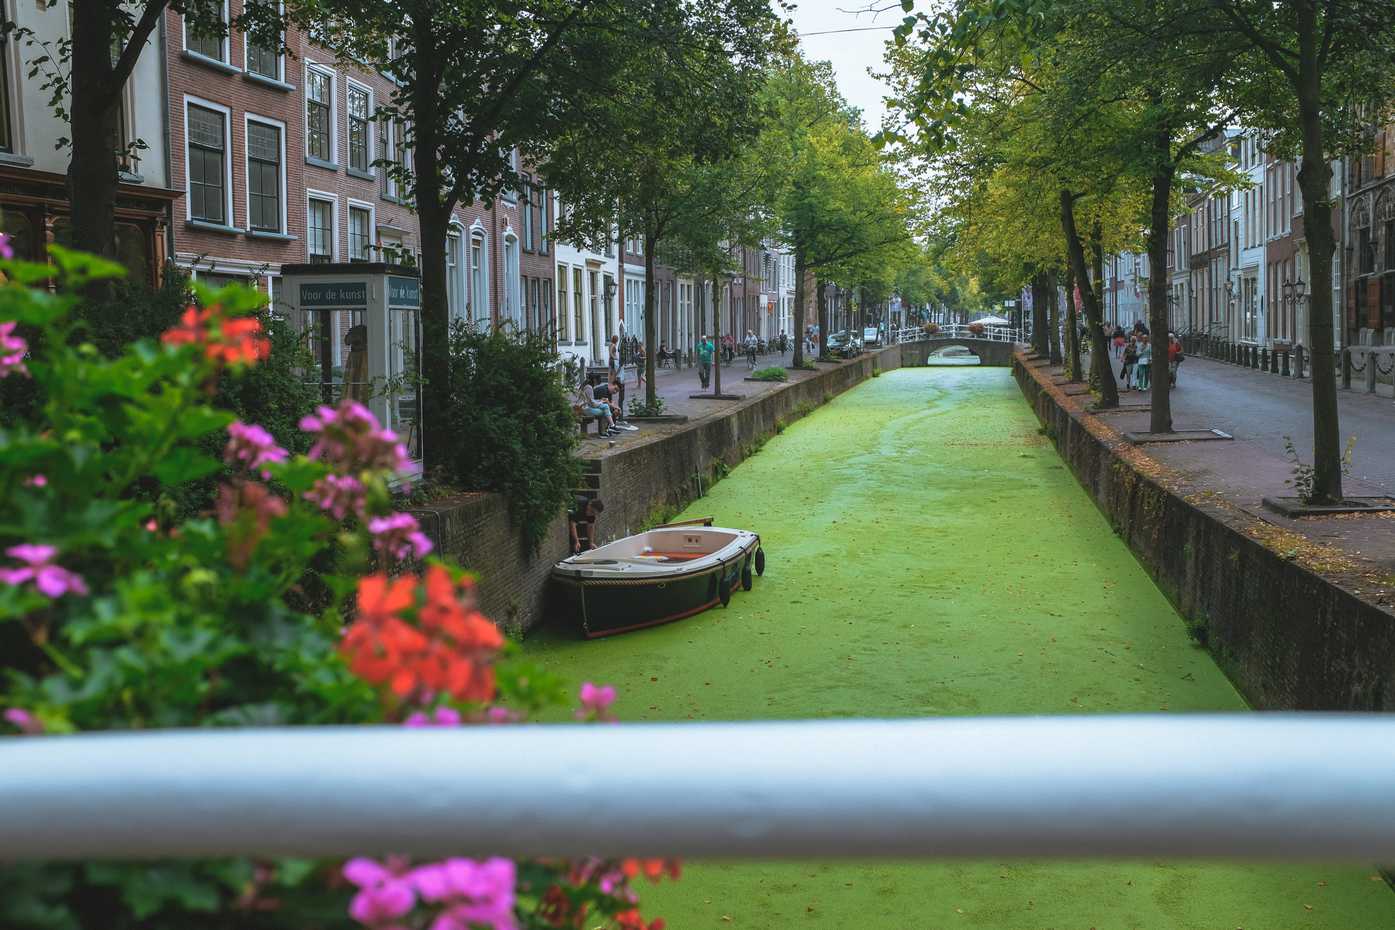 Another view of a green canal